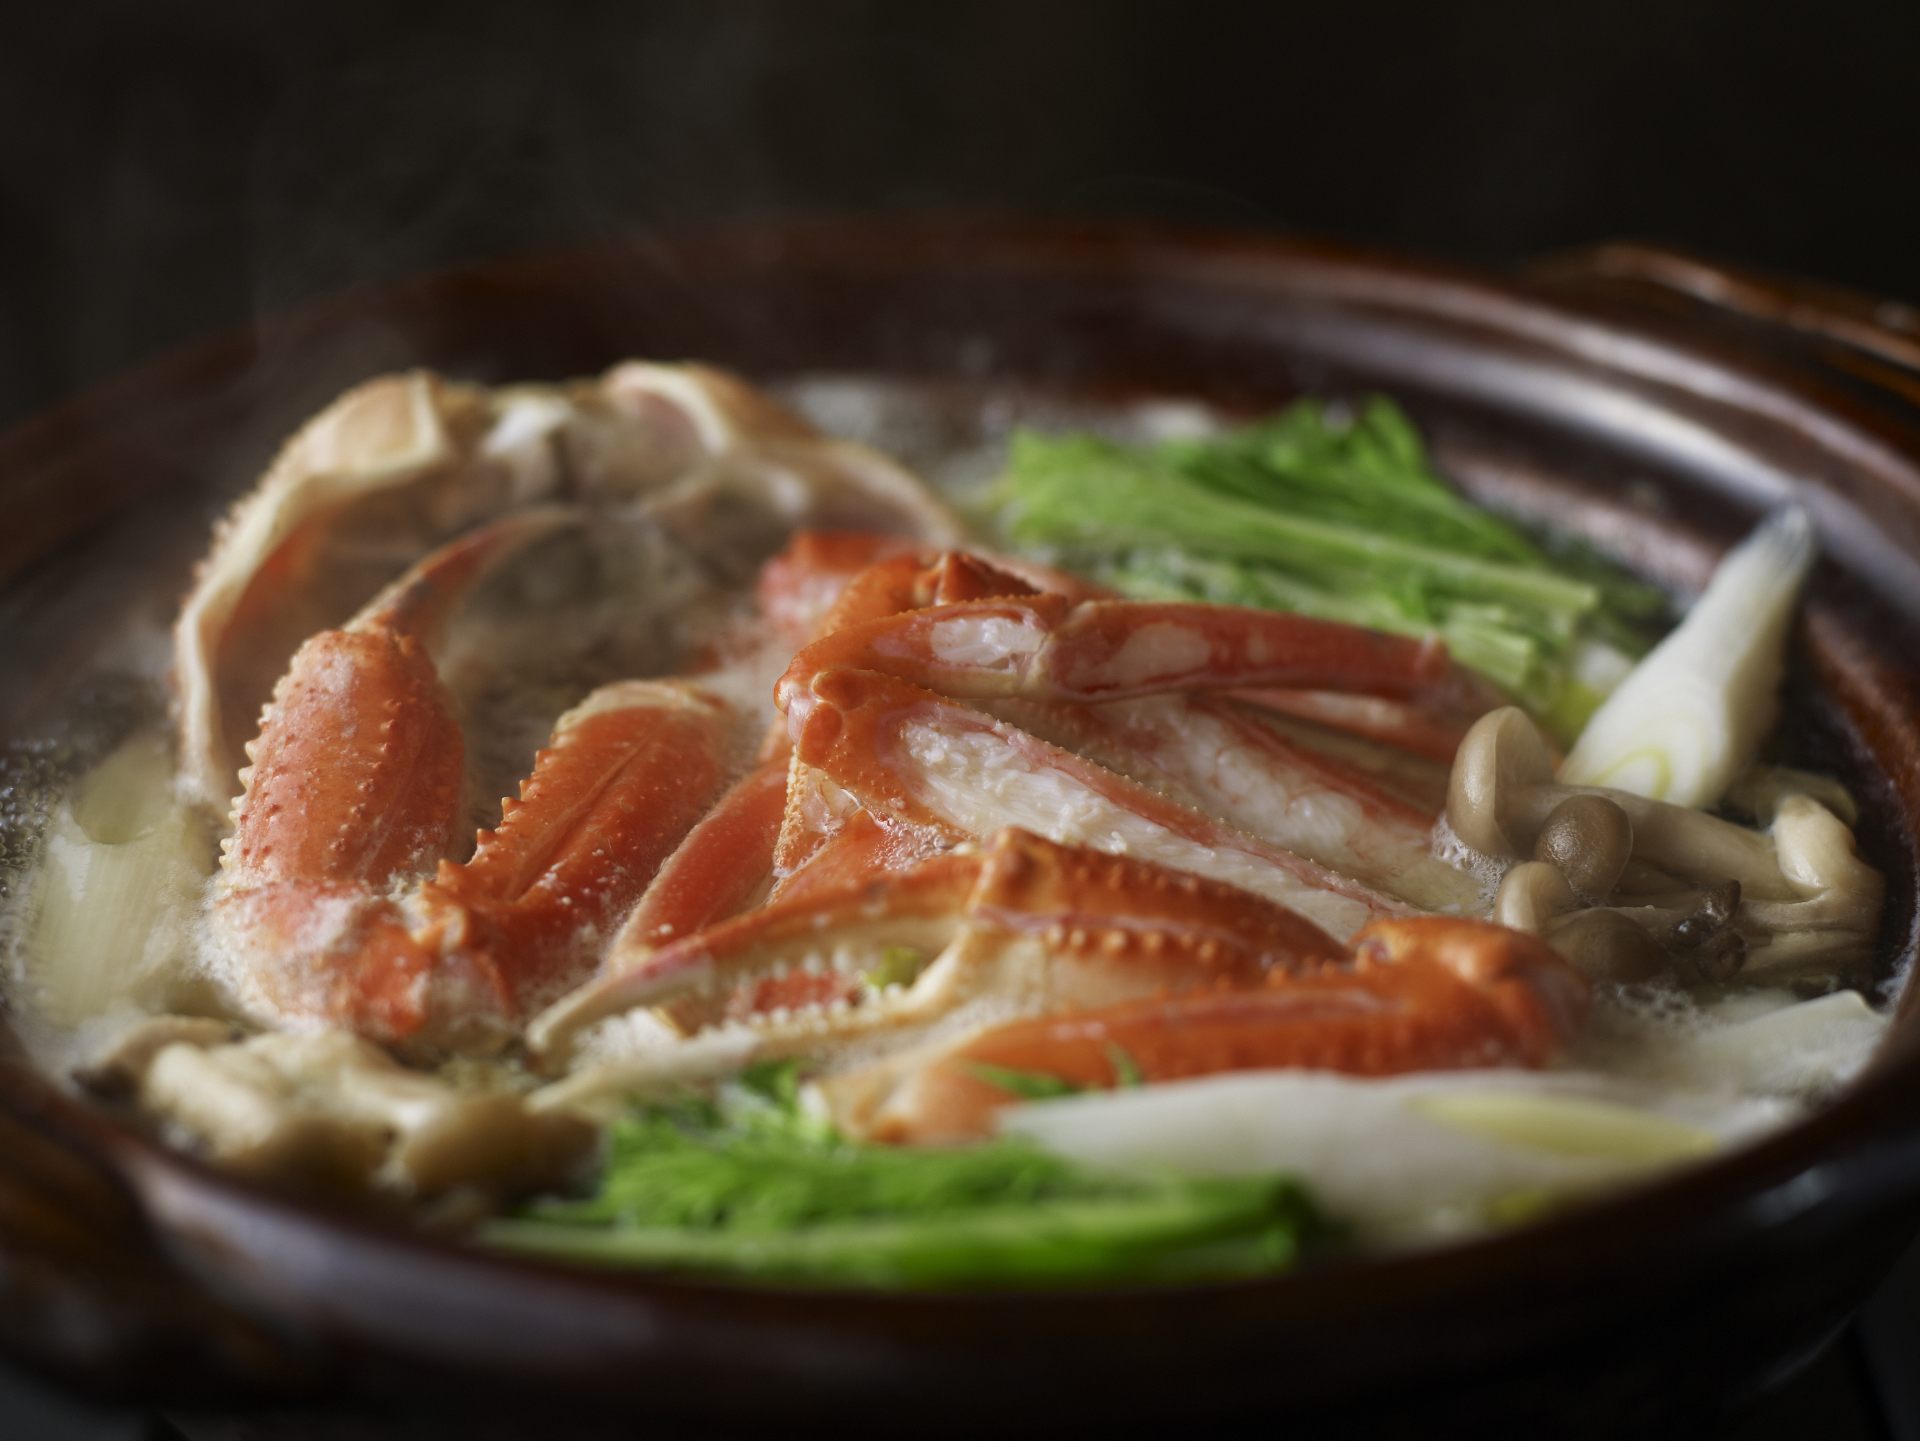 The crab season is from November to March. In Kinosaki Onsen in winter, crab dishes are a must. 